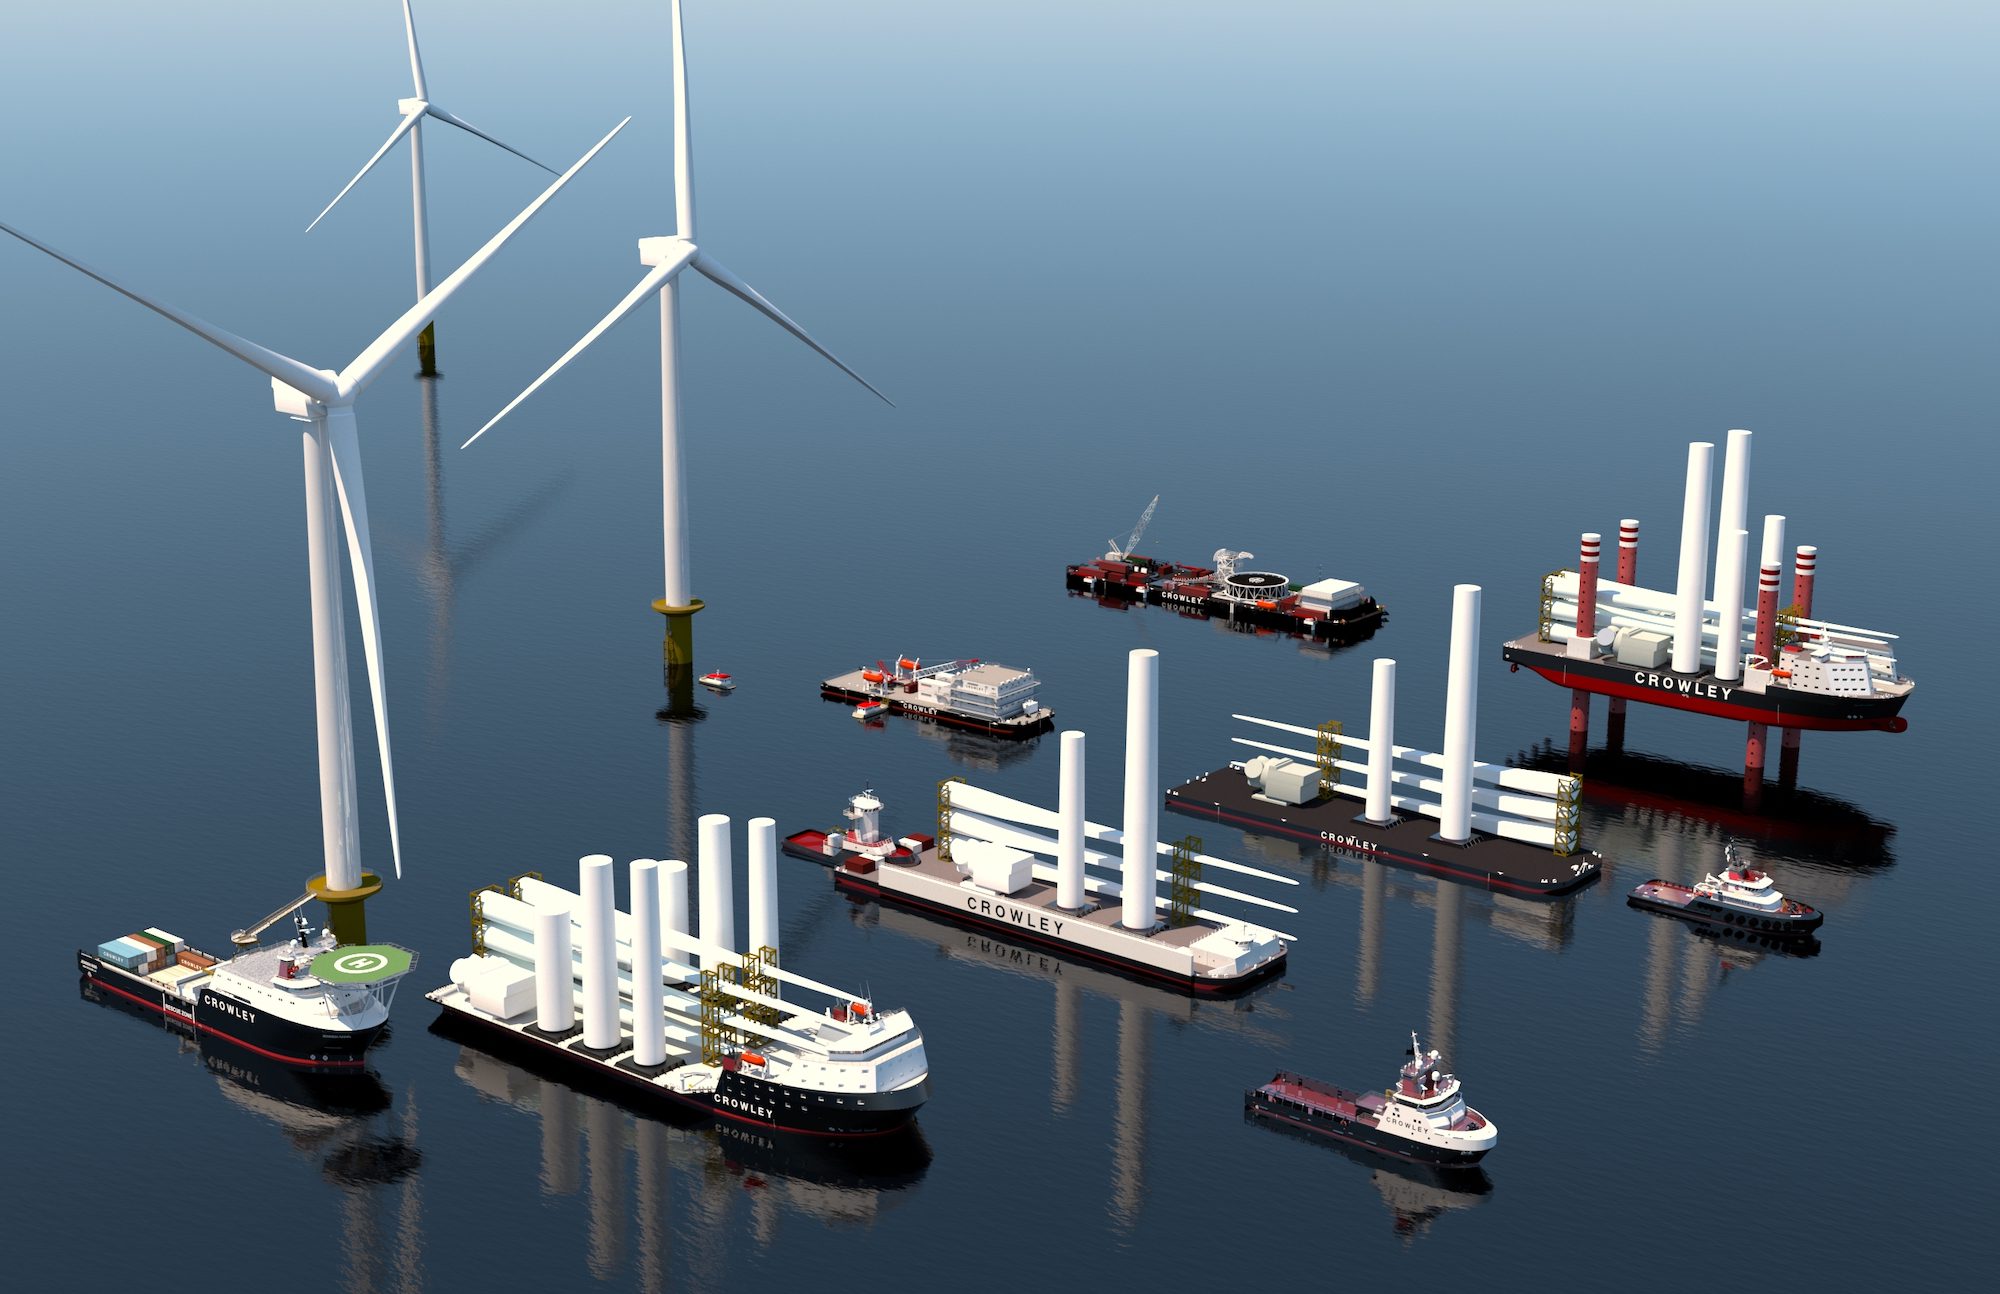 Offshore Wind’s Jones Act Supply Chain Getting into Gear